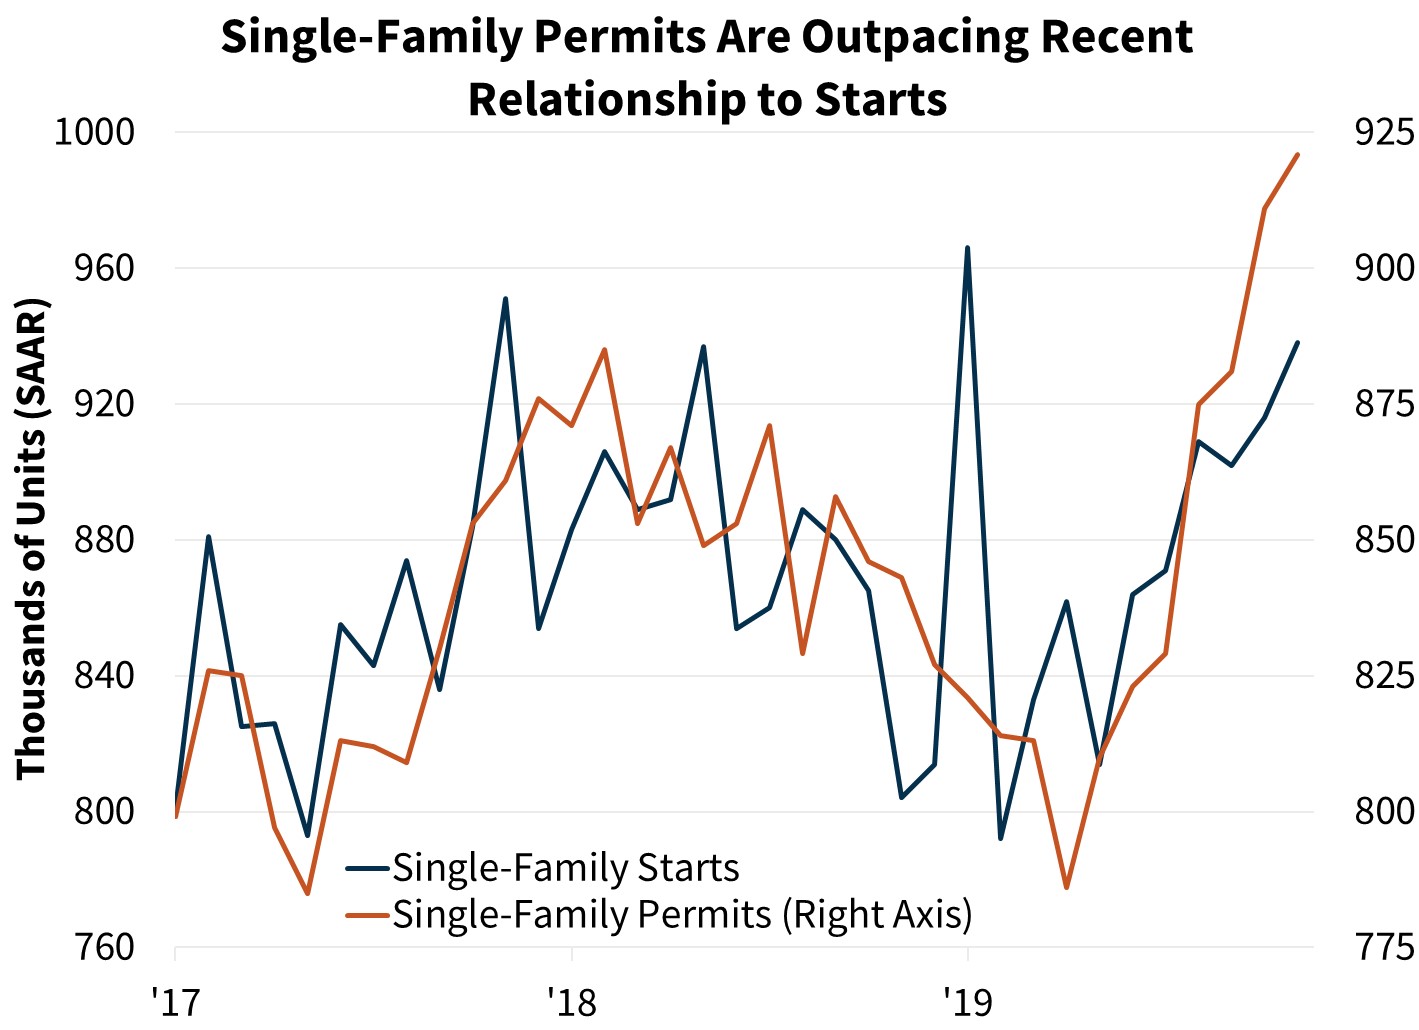 Single-Family Permits Are Outpacing Recent Relationship to Starts